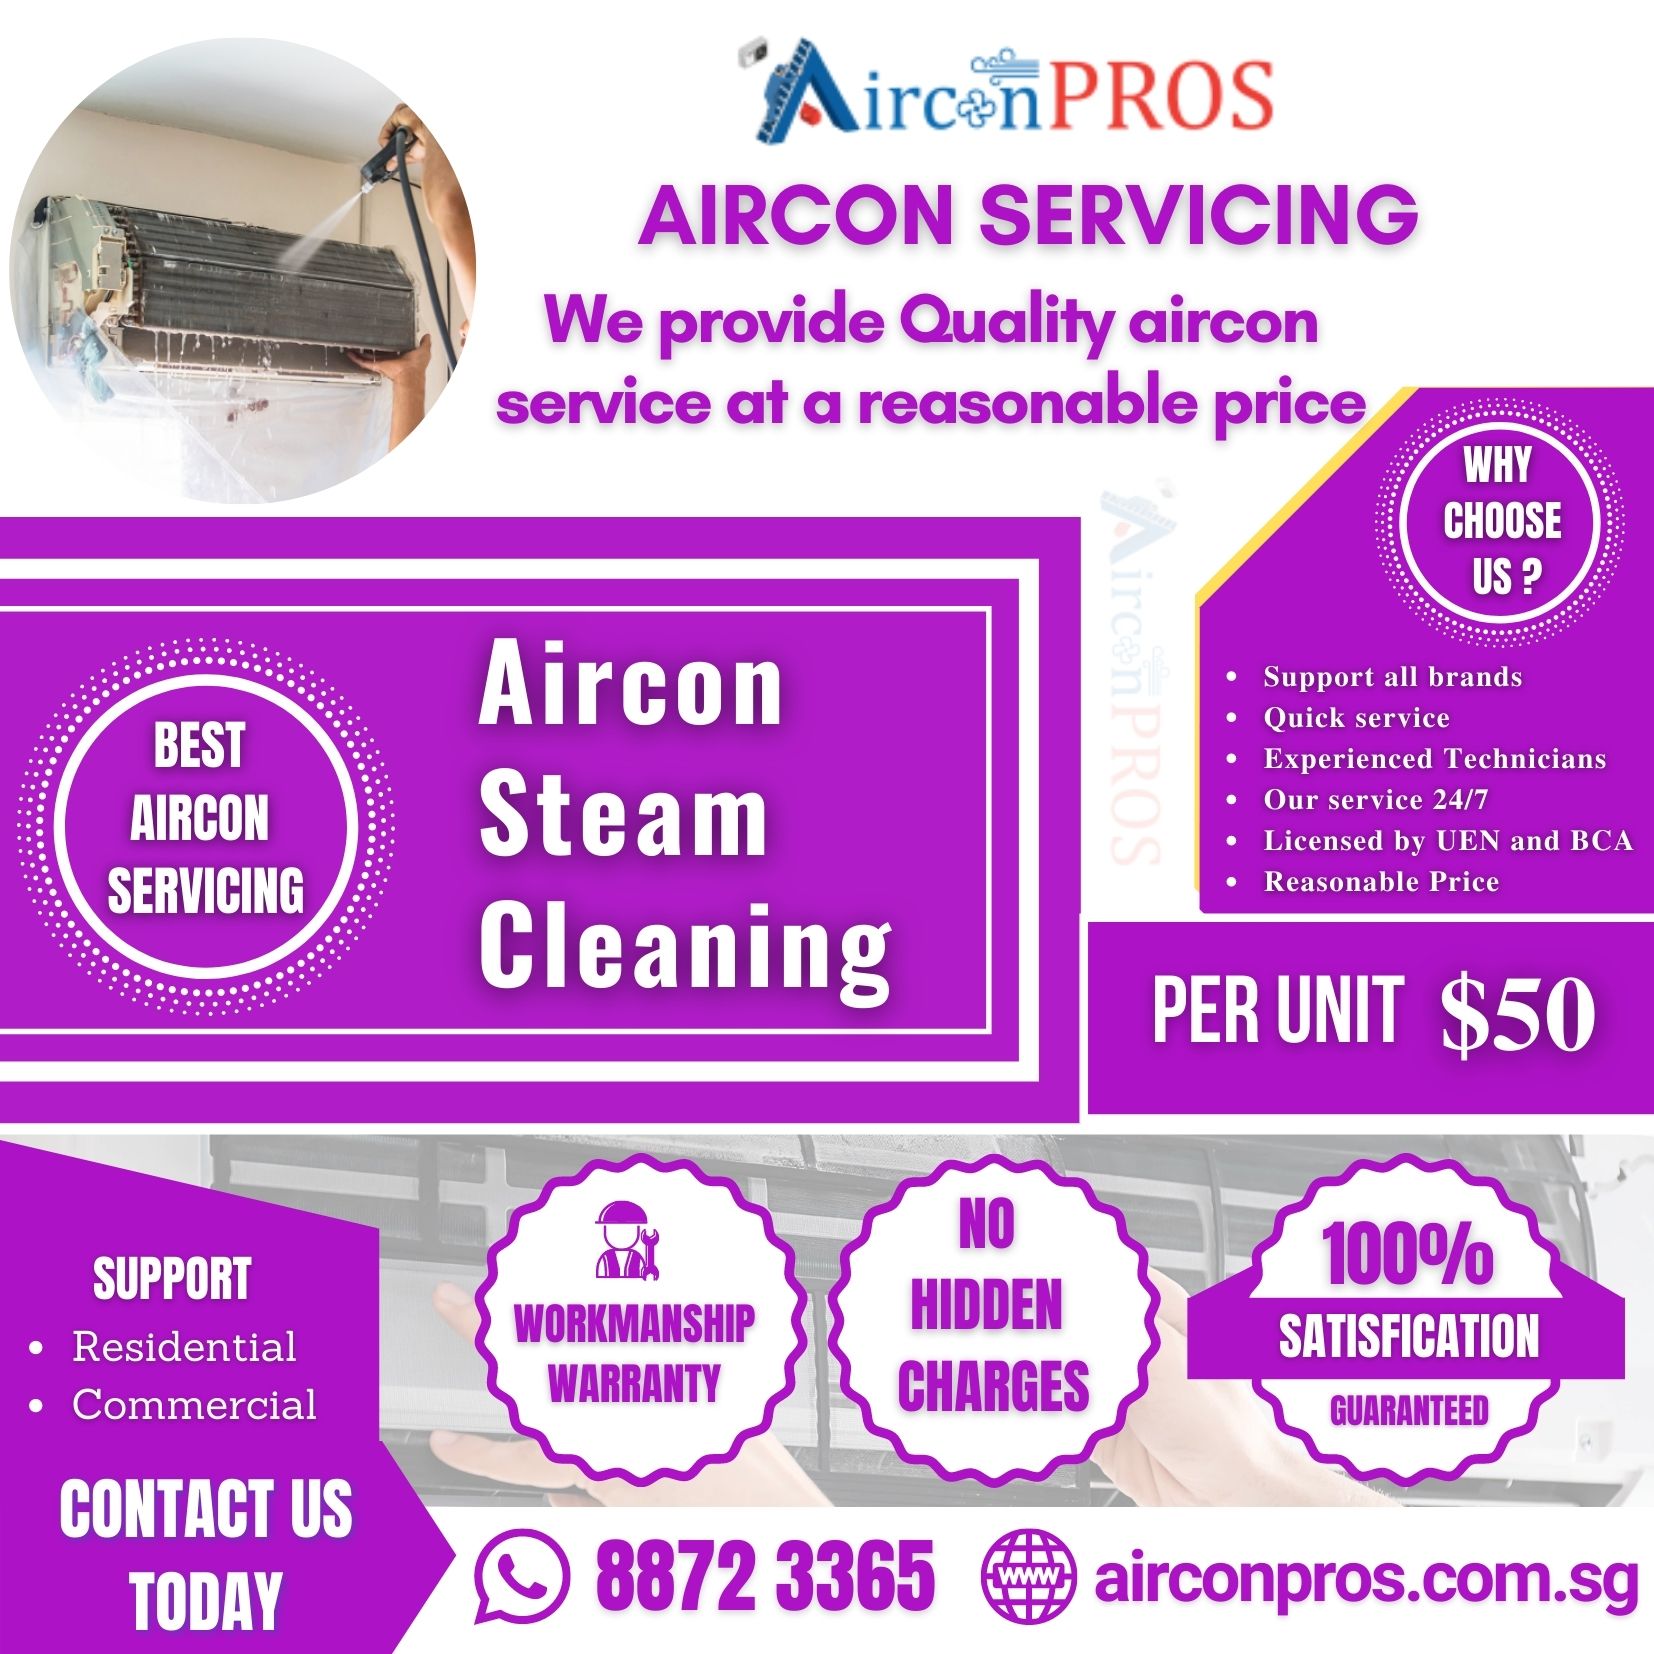 Aircon steam cleaning